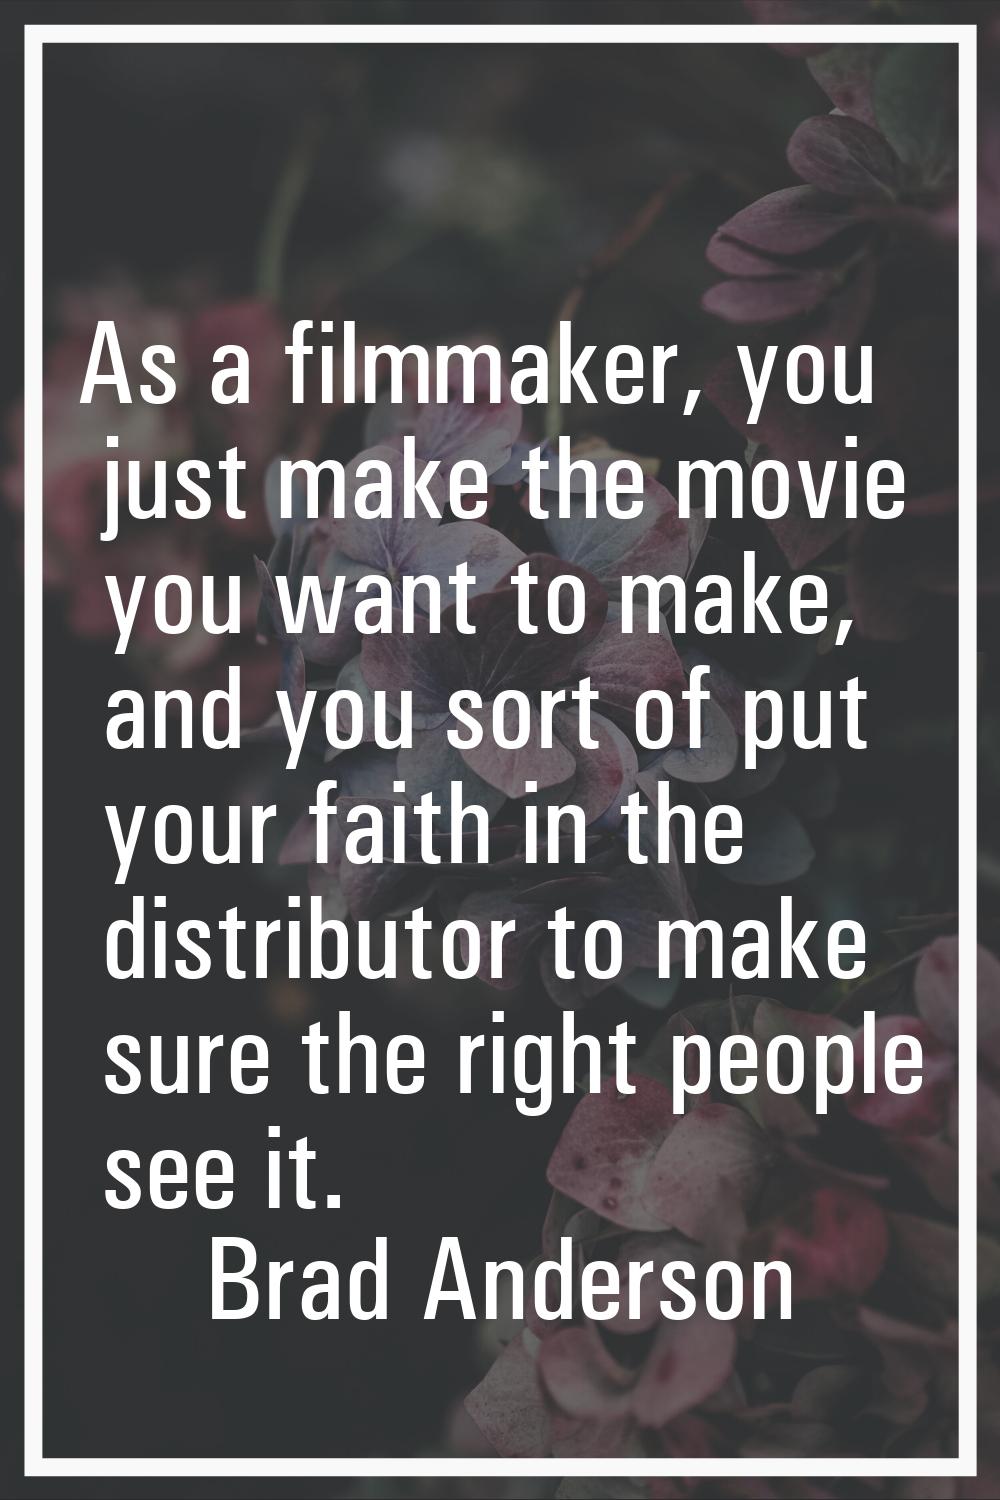 As a filmmaker, you just make the movie you want to make, and you sort of put your faith in the dis